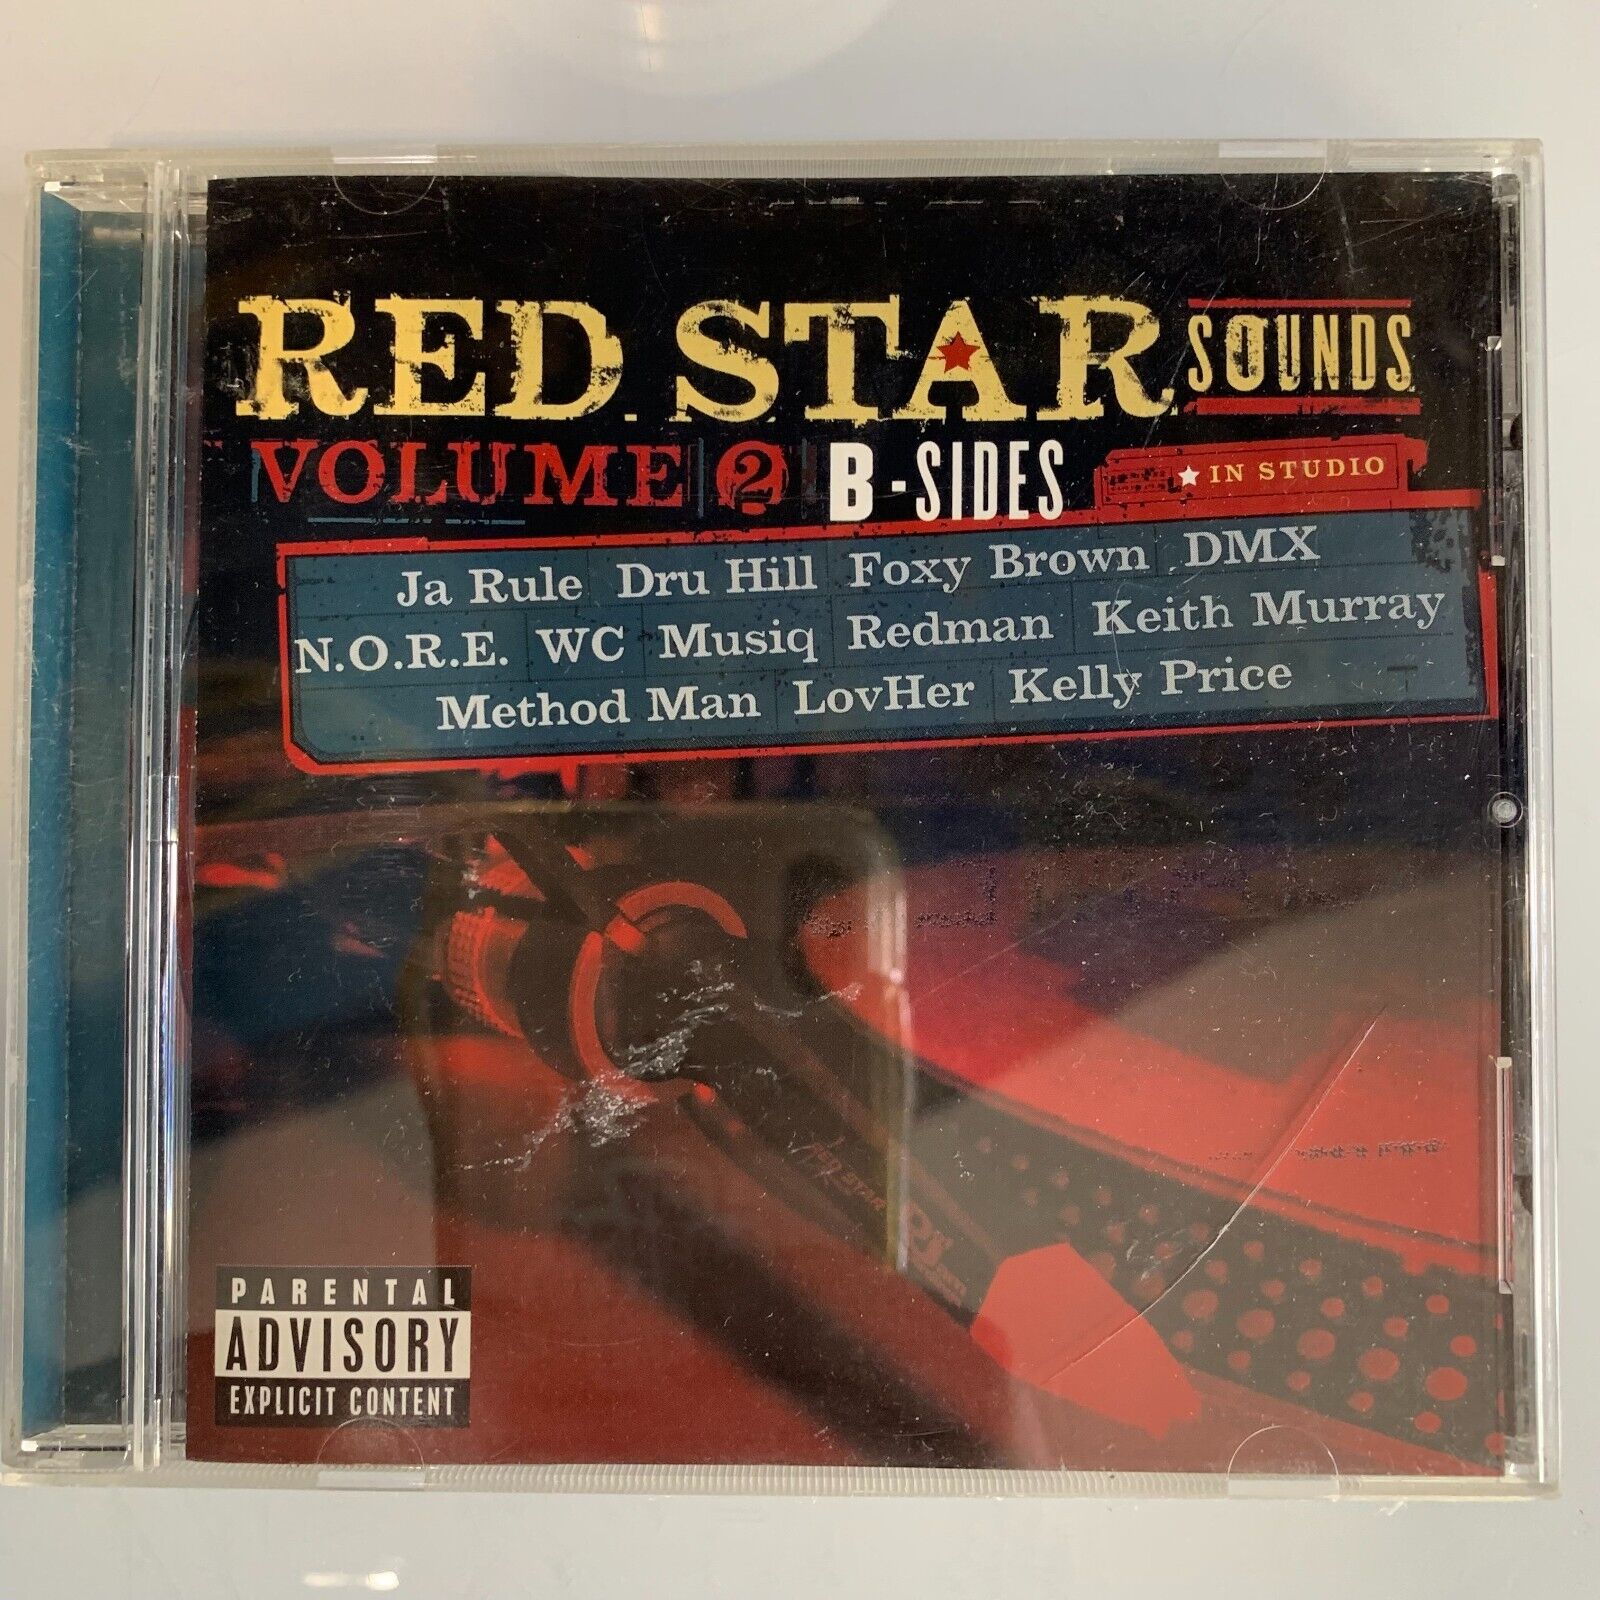 Red Star Sounds, Vol. 2: B-Sides [PA] by Various Artists (CD, Nov-2002,...